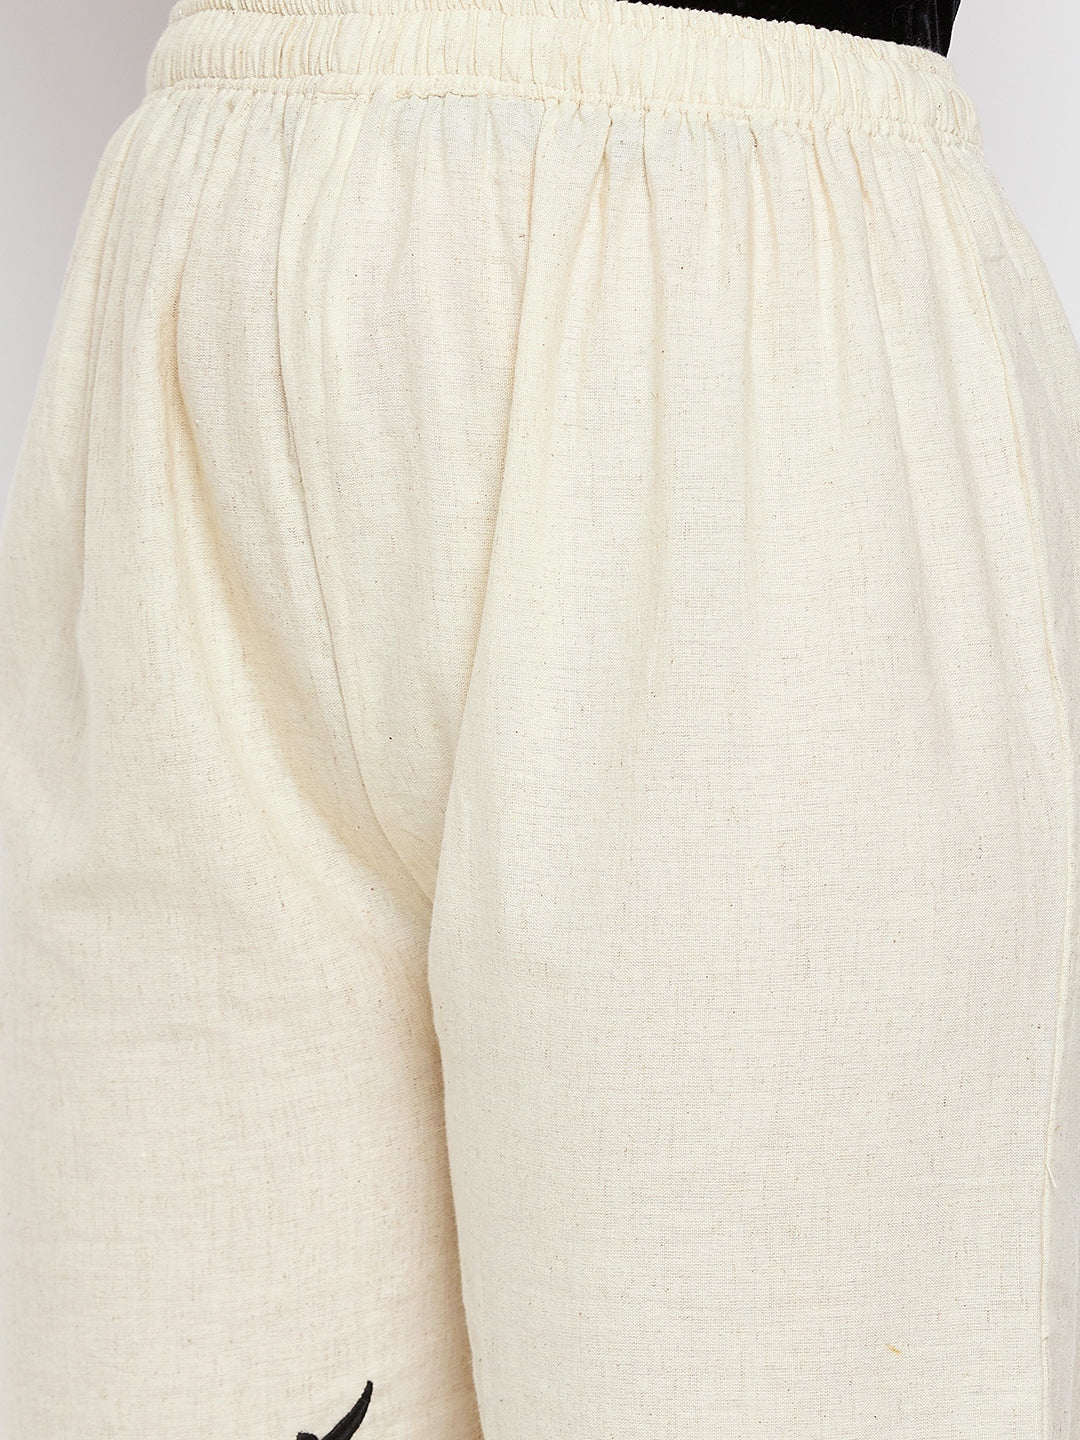 Clora Beige Embroidered Trouser